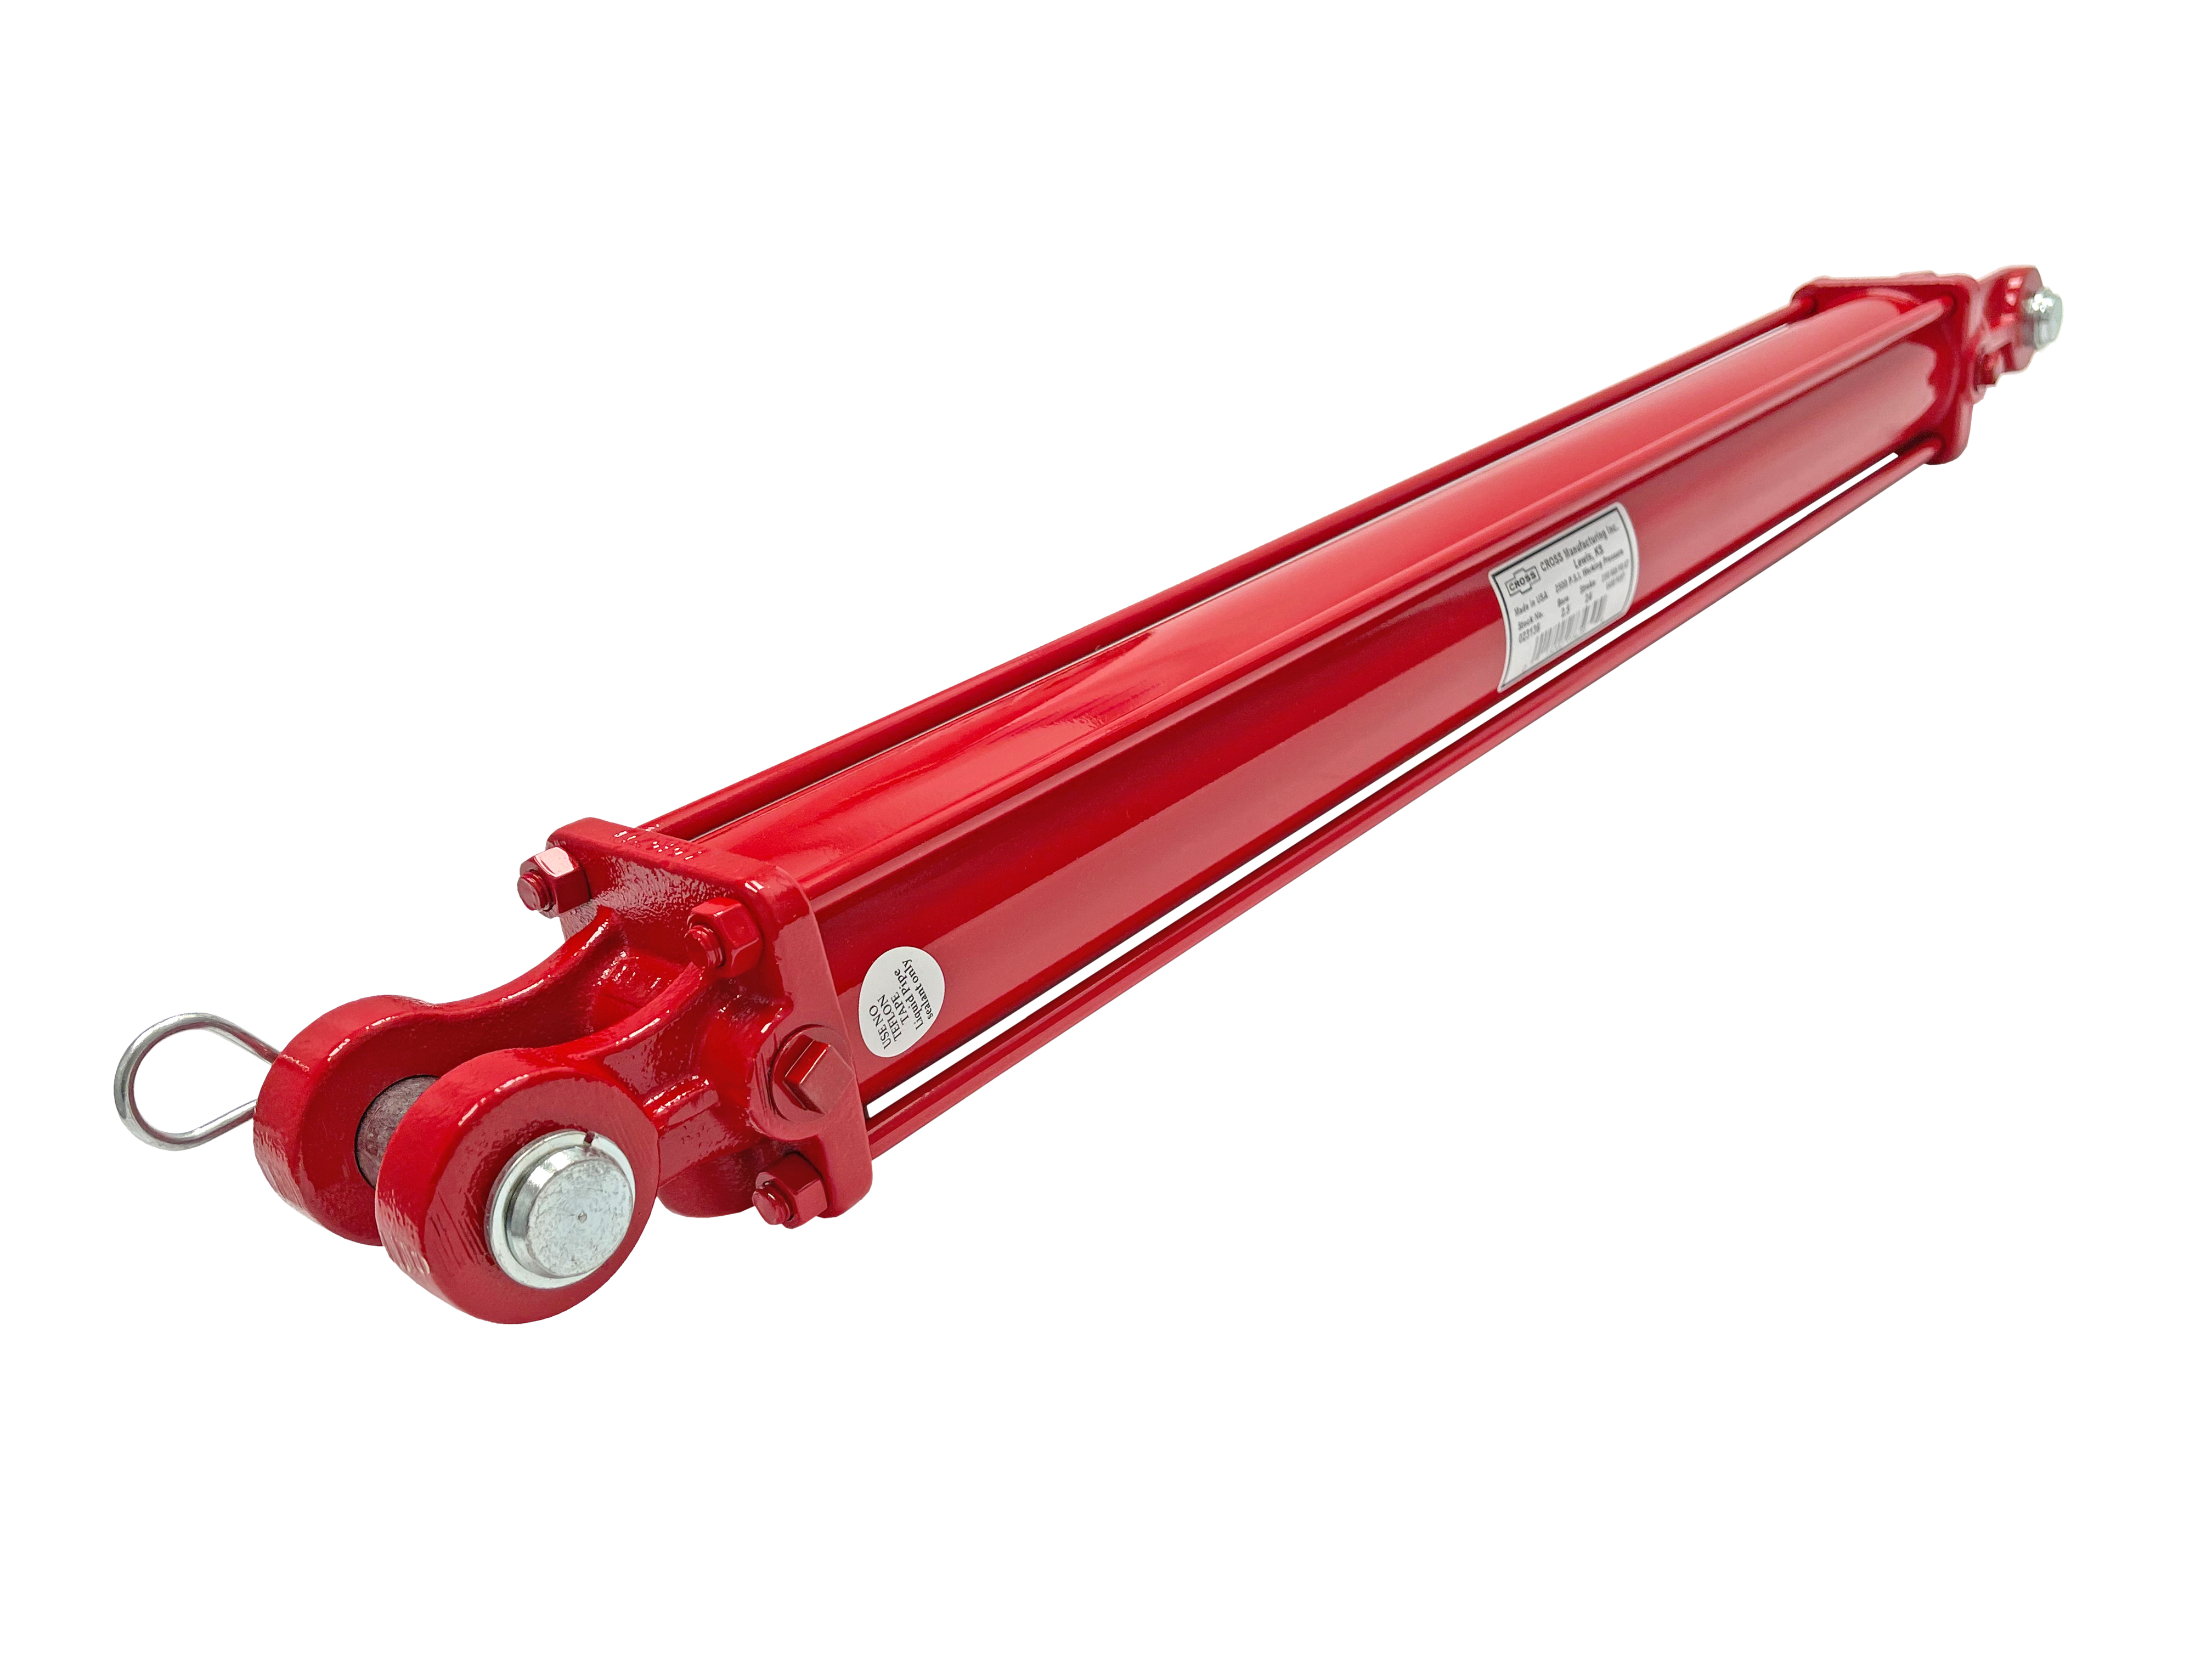 2 bore x 36 stroke CROSS hydraulic cylinder, tie rod double acting cylinder DB series | CROSS MANUFACTURING